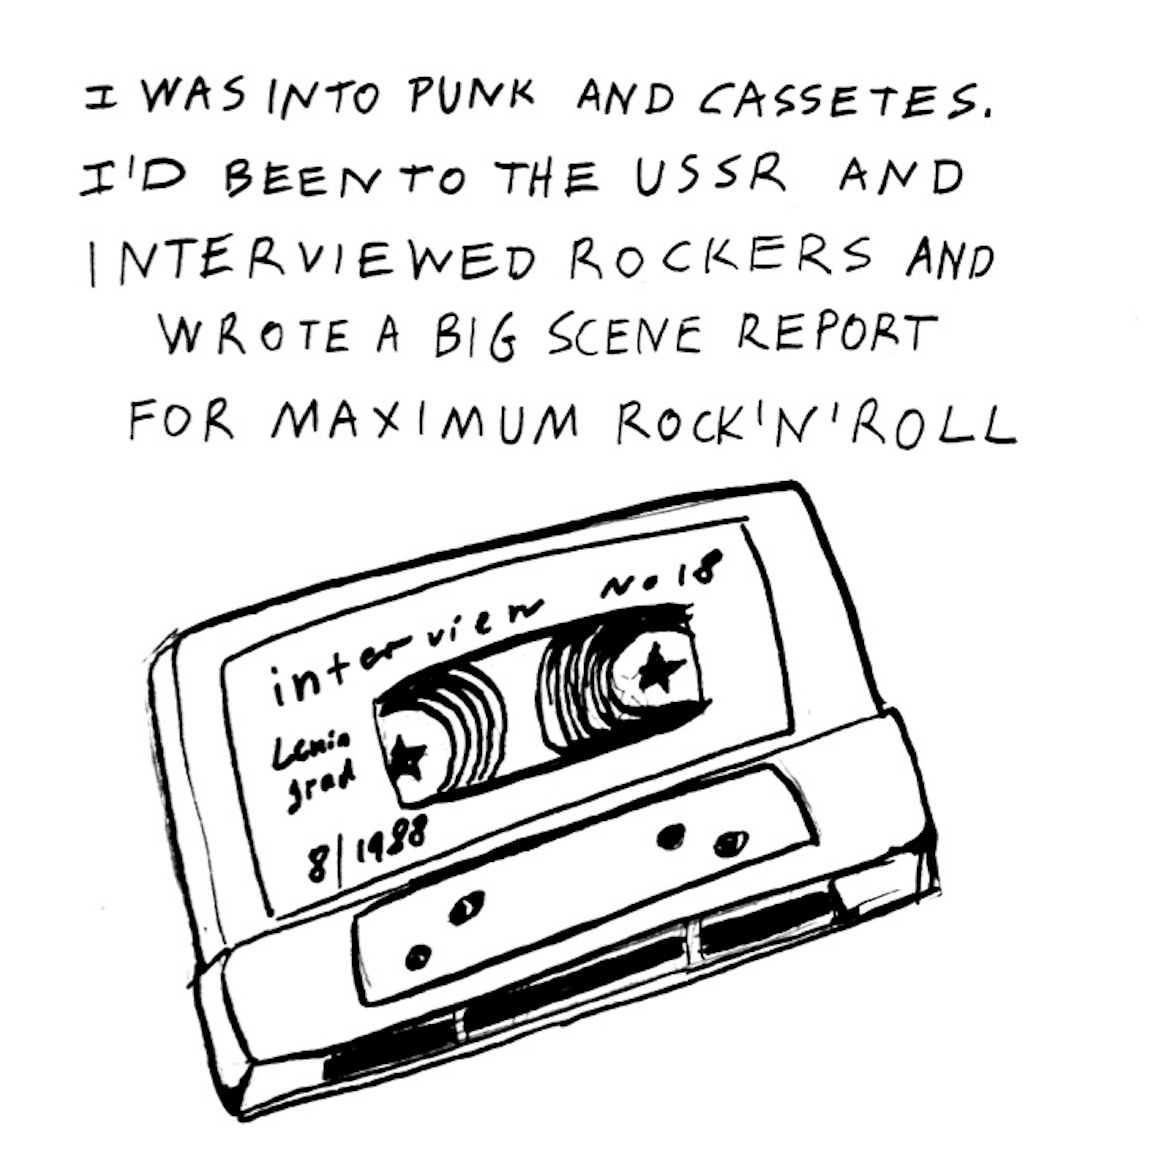 â€œI was into punk and cassettes. Iâ€™d been to the USSR and interviewed rockers and wrote a big scene report for maximum rock â€™nâ€™ roll.â€